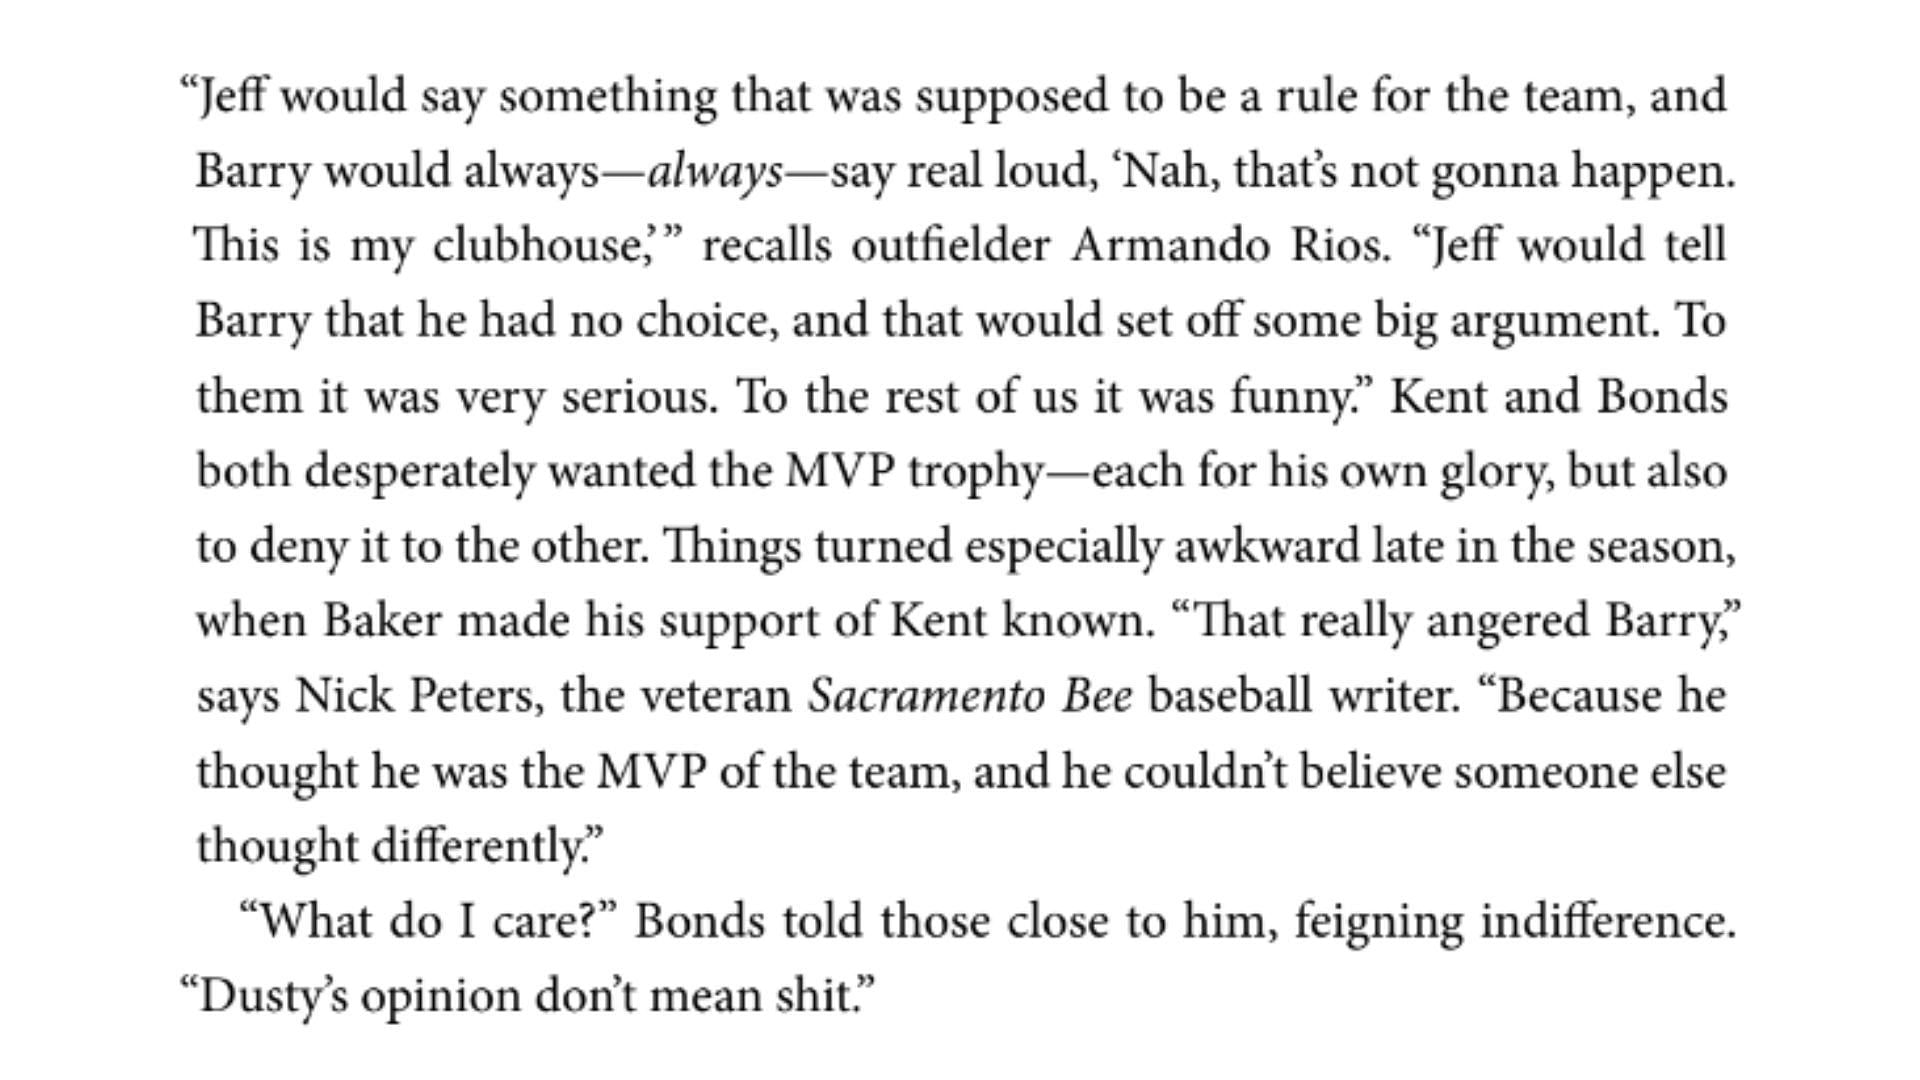 An excerpt from the 2006 book, &quot;Love Me, Hate Me: Barry Bonds and the making of an Antihero.&quot;